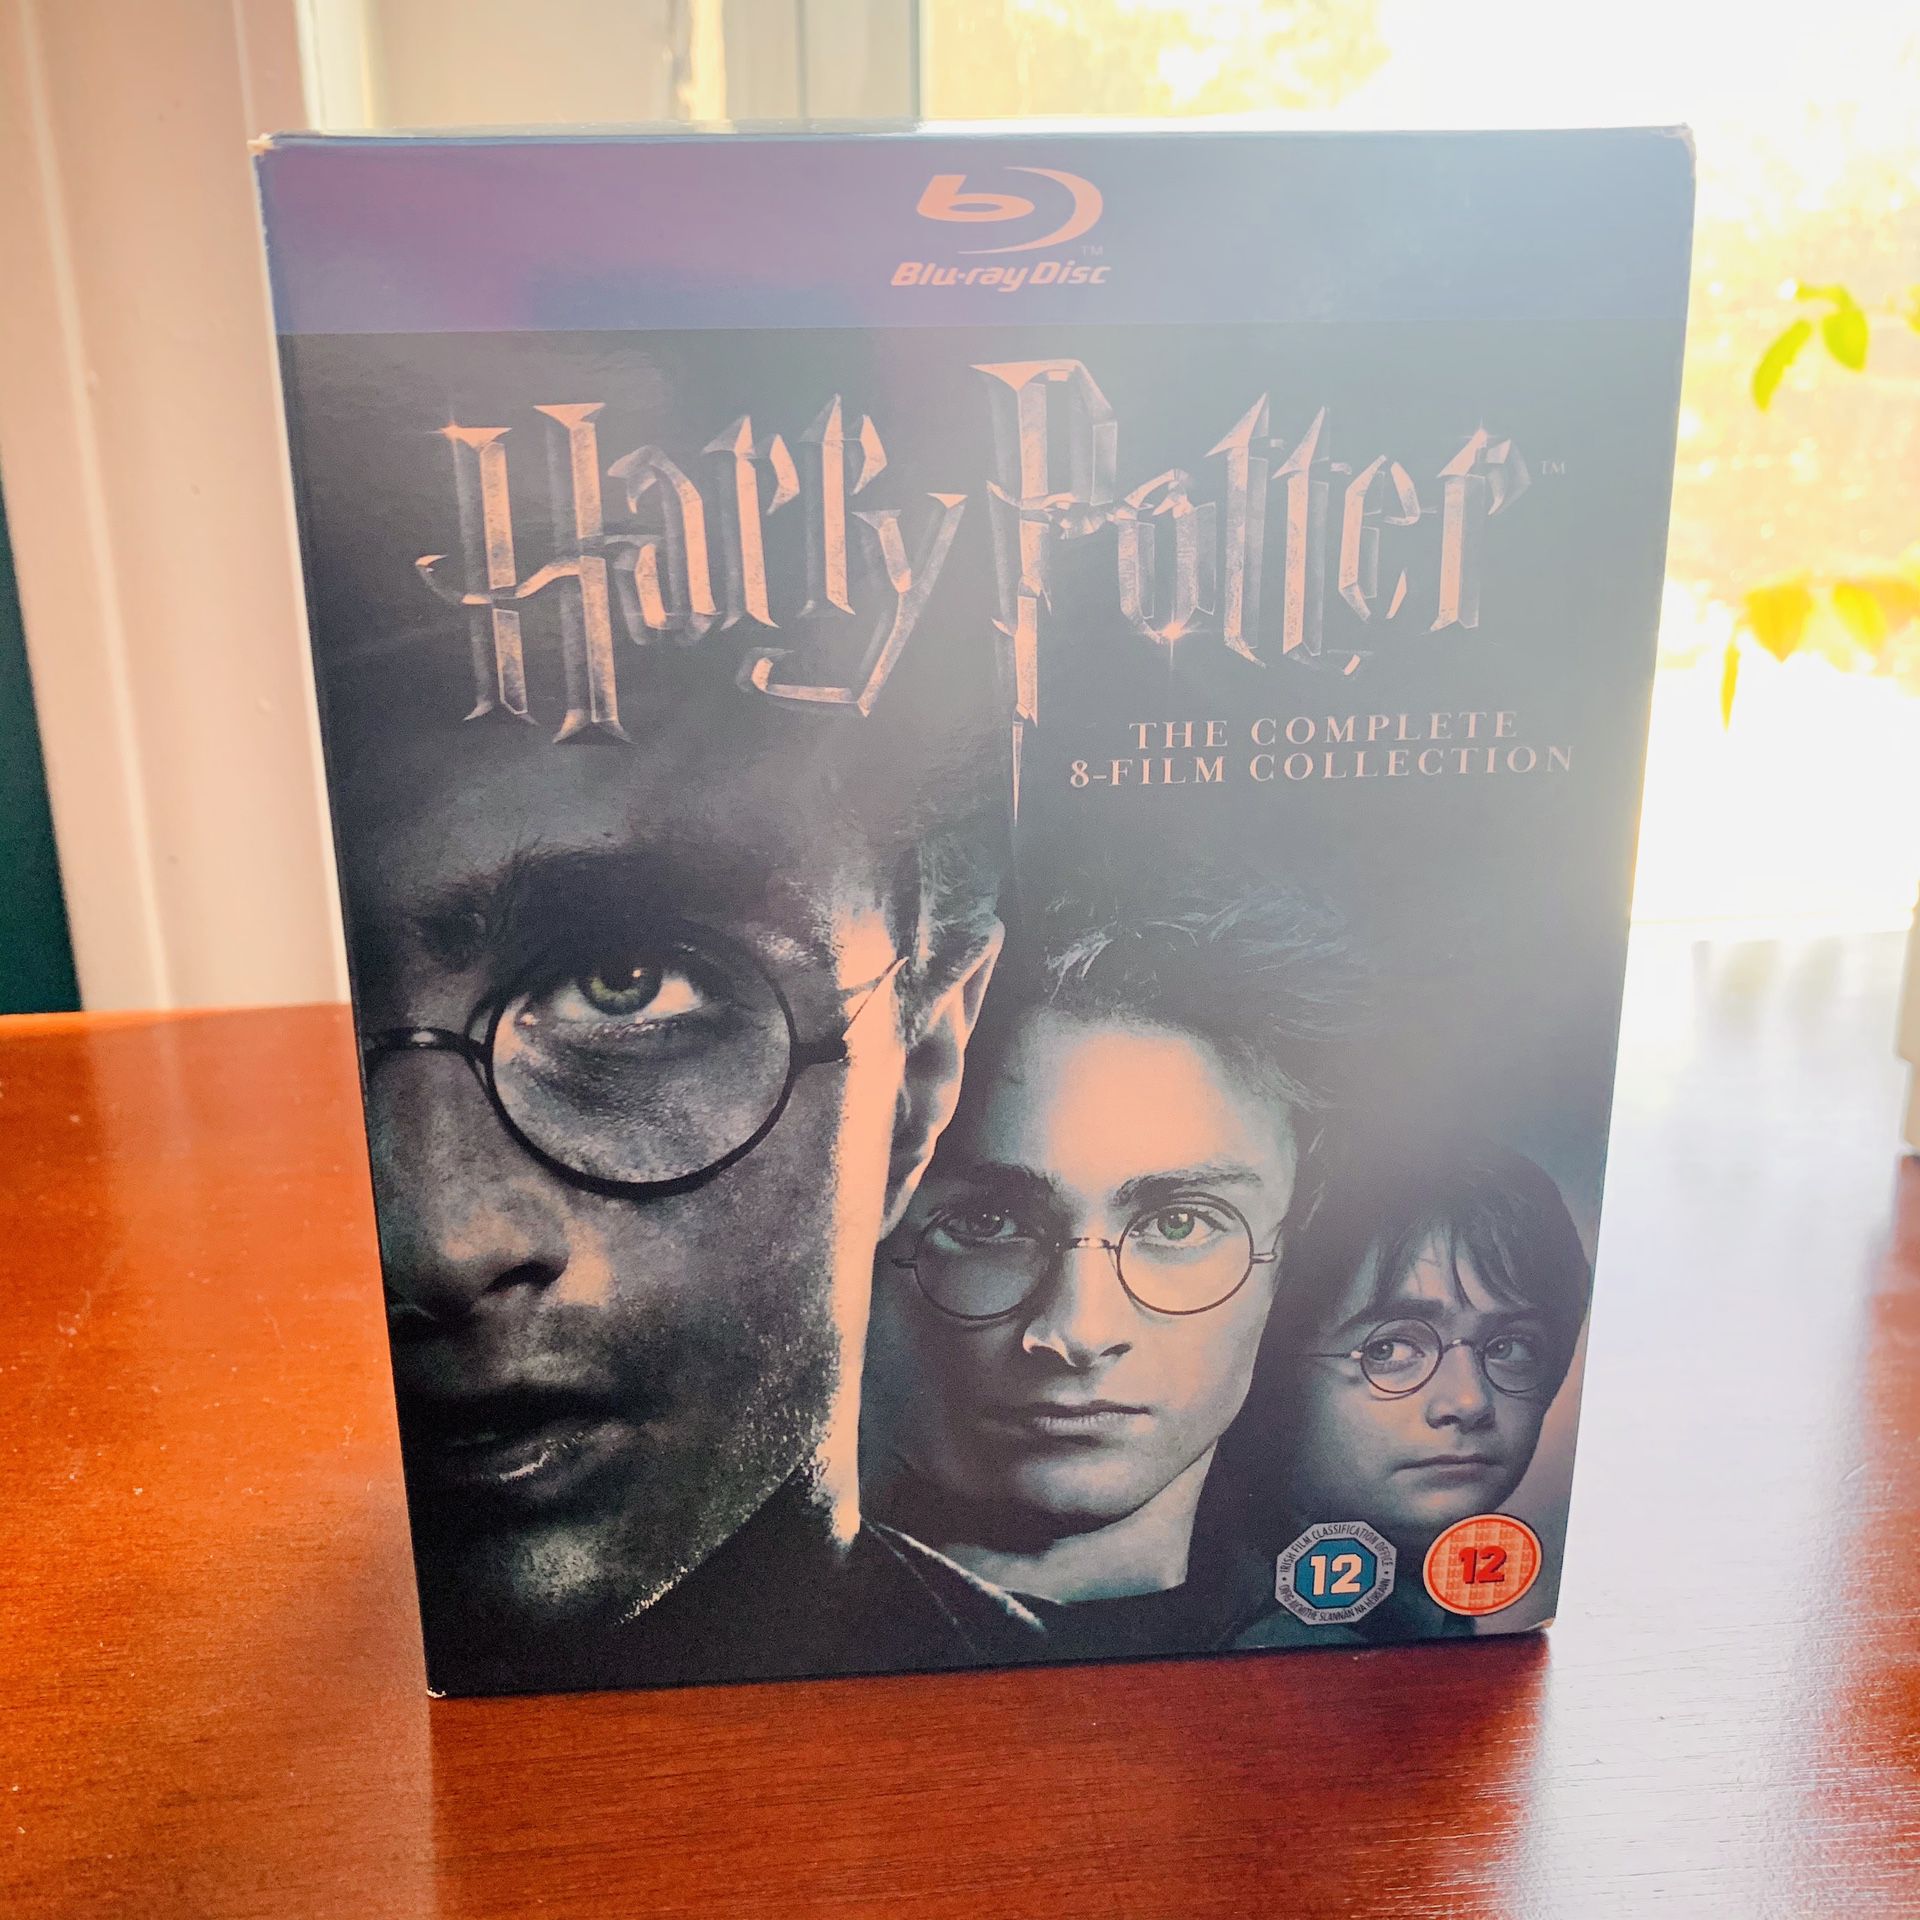 Harry Potter, The Complete 8 Film Collection, Blu-ray